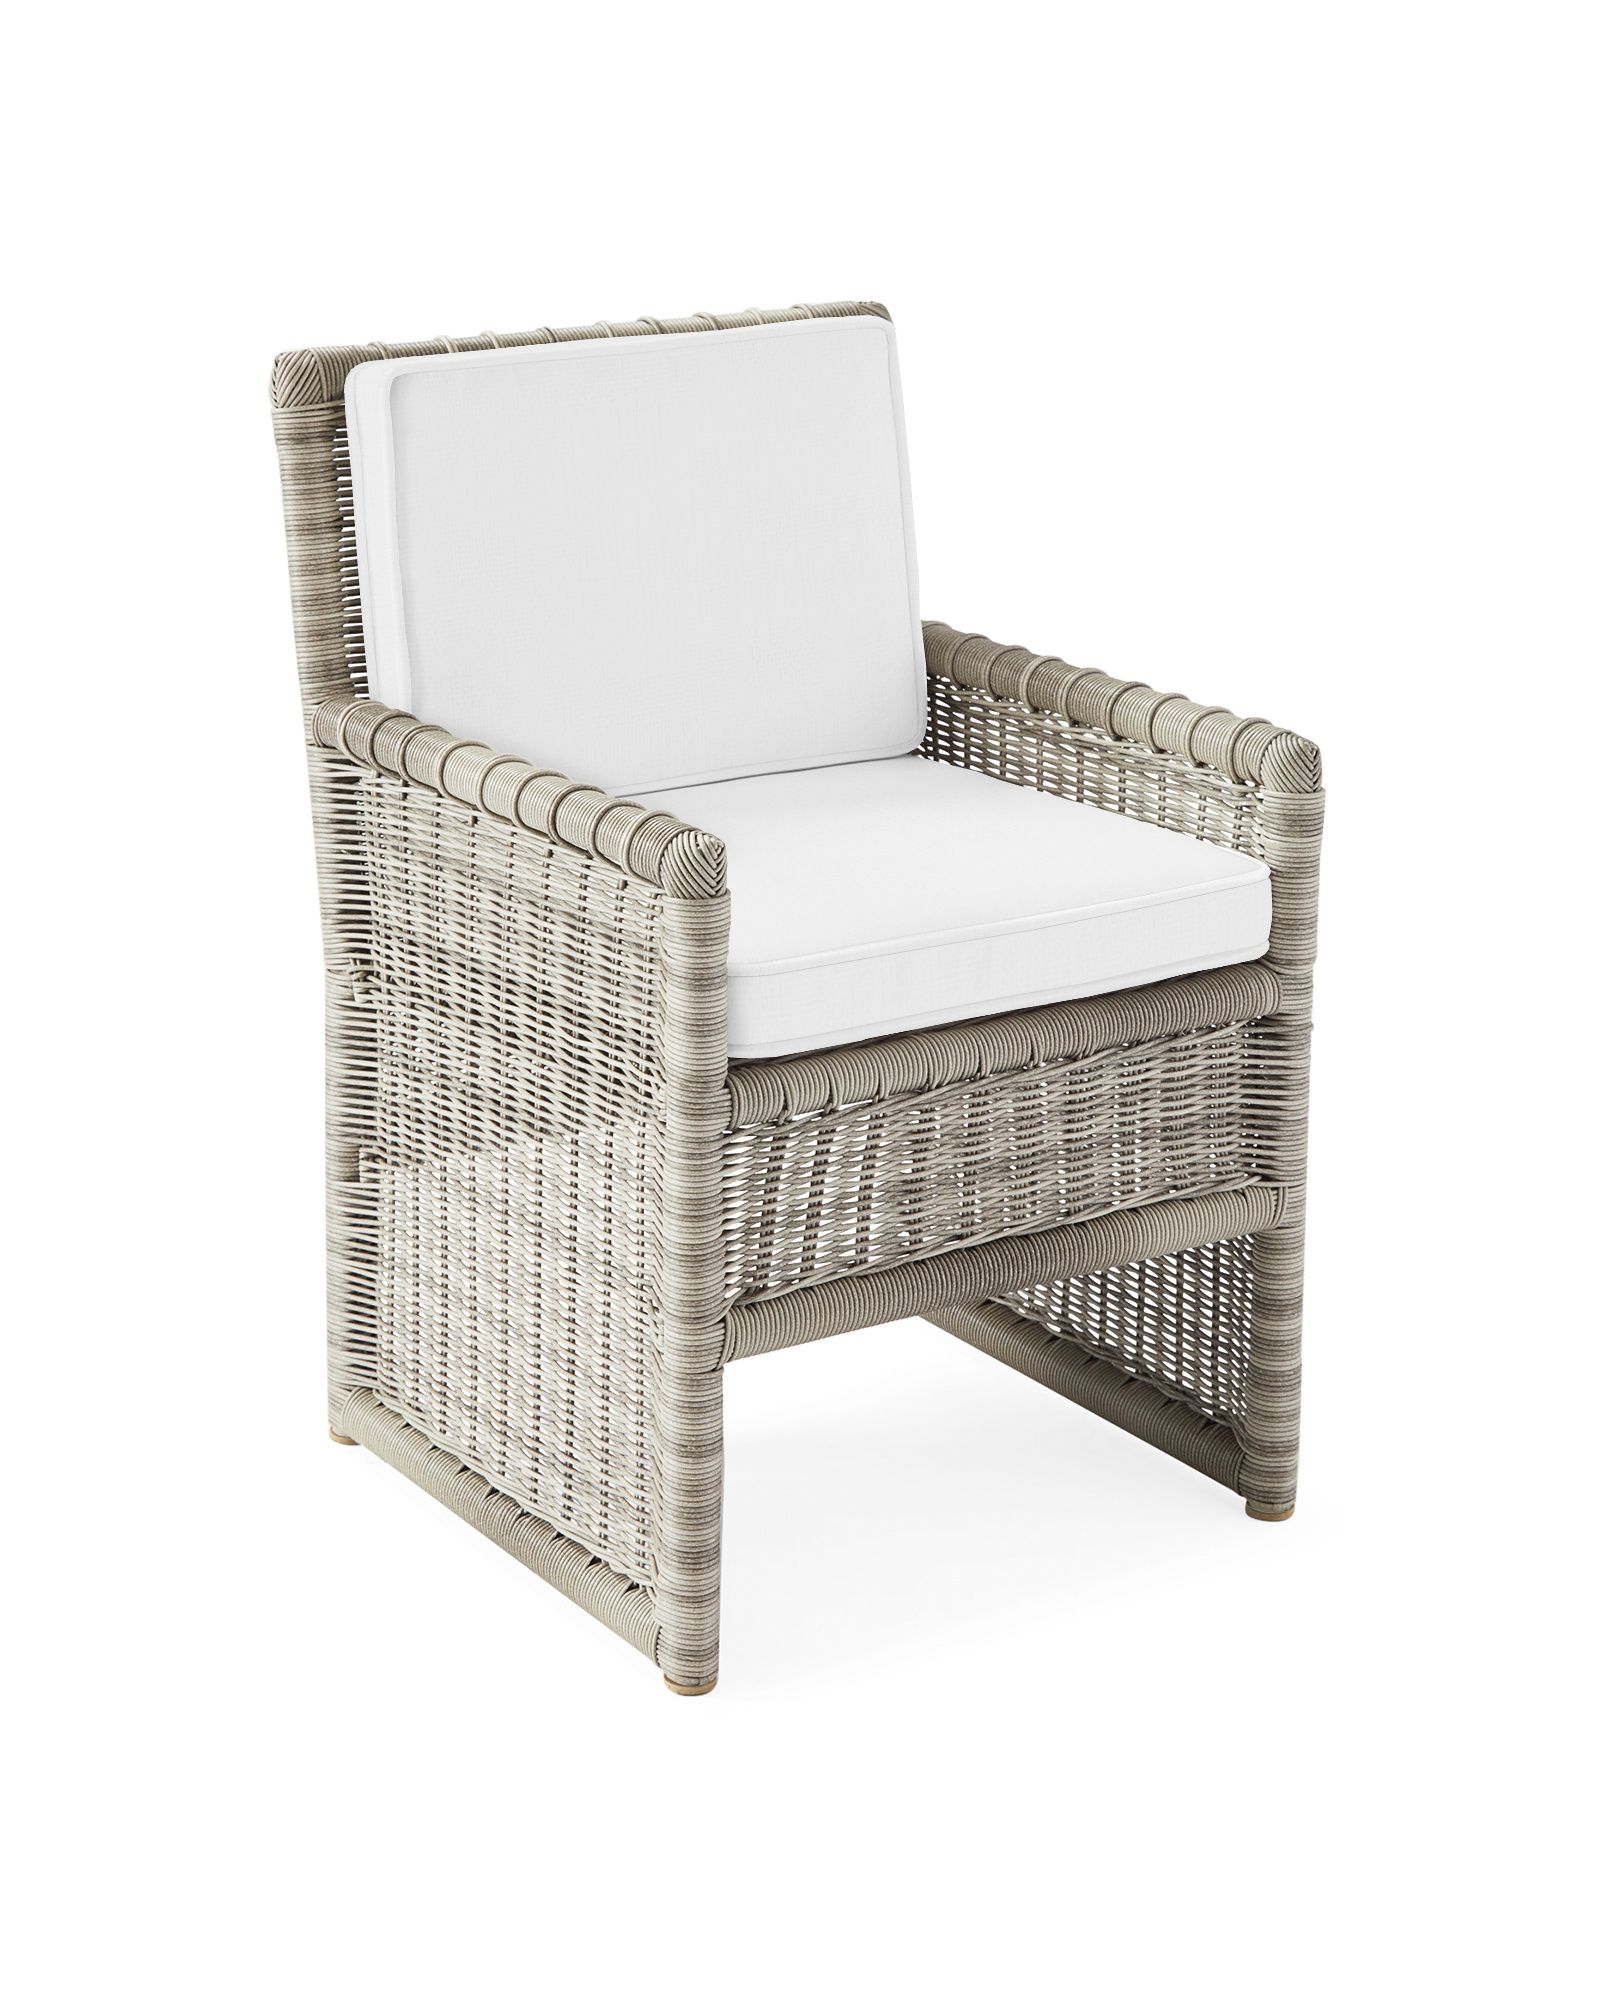 Pacifica Dining Chair - Harbor Grey | Serena and Lily